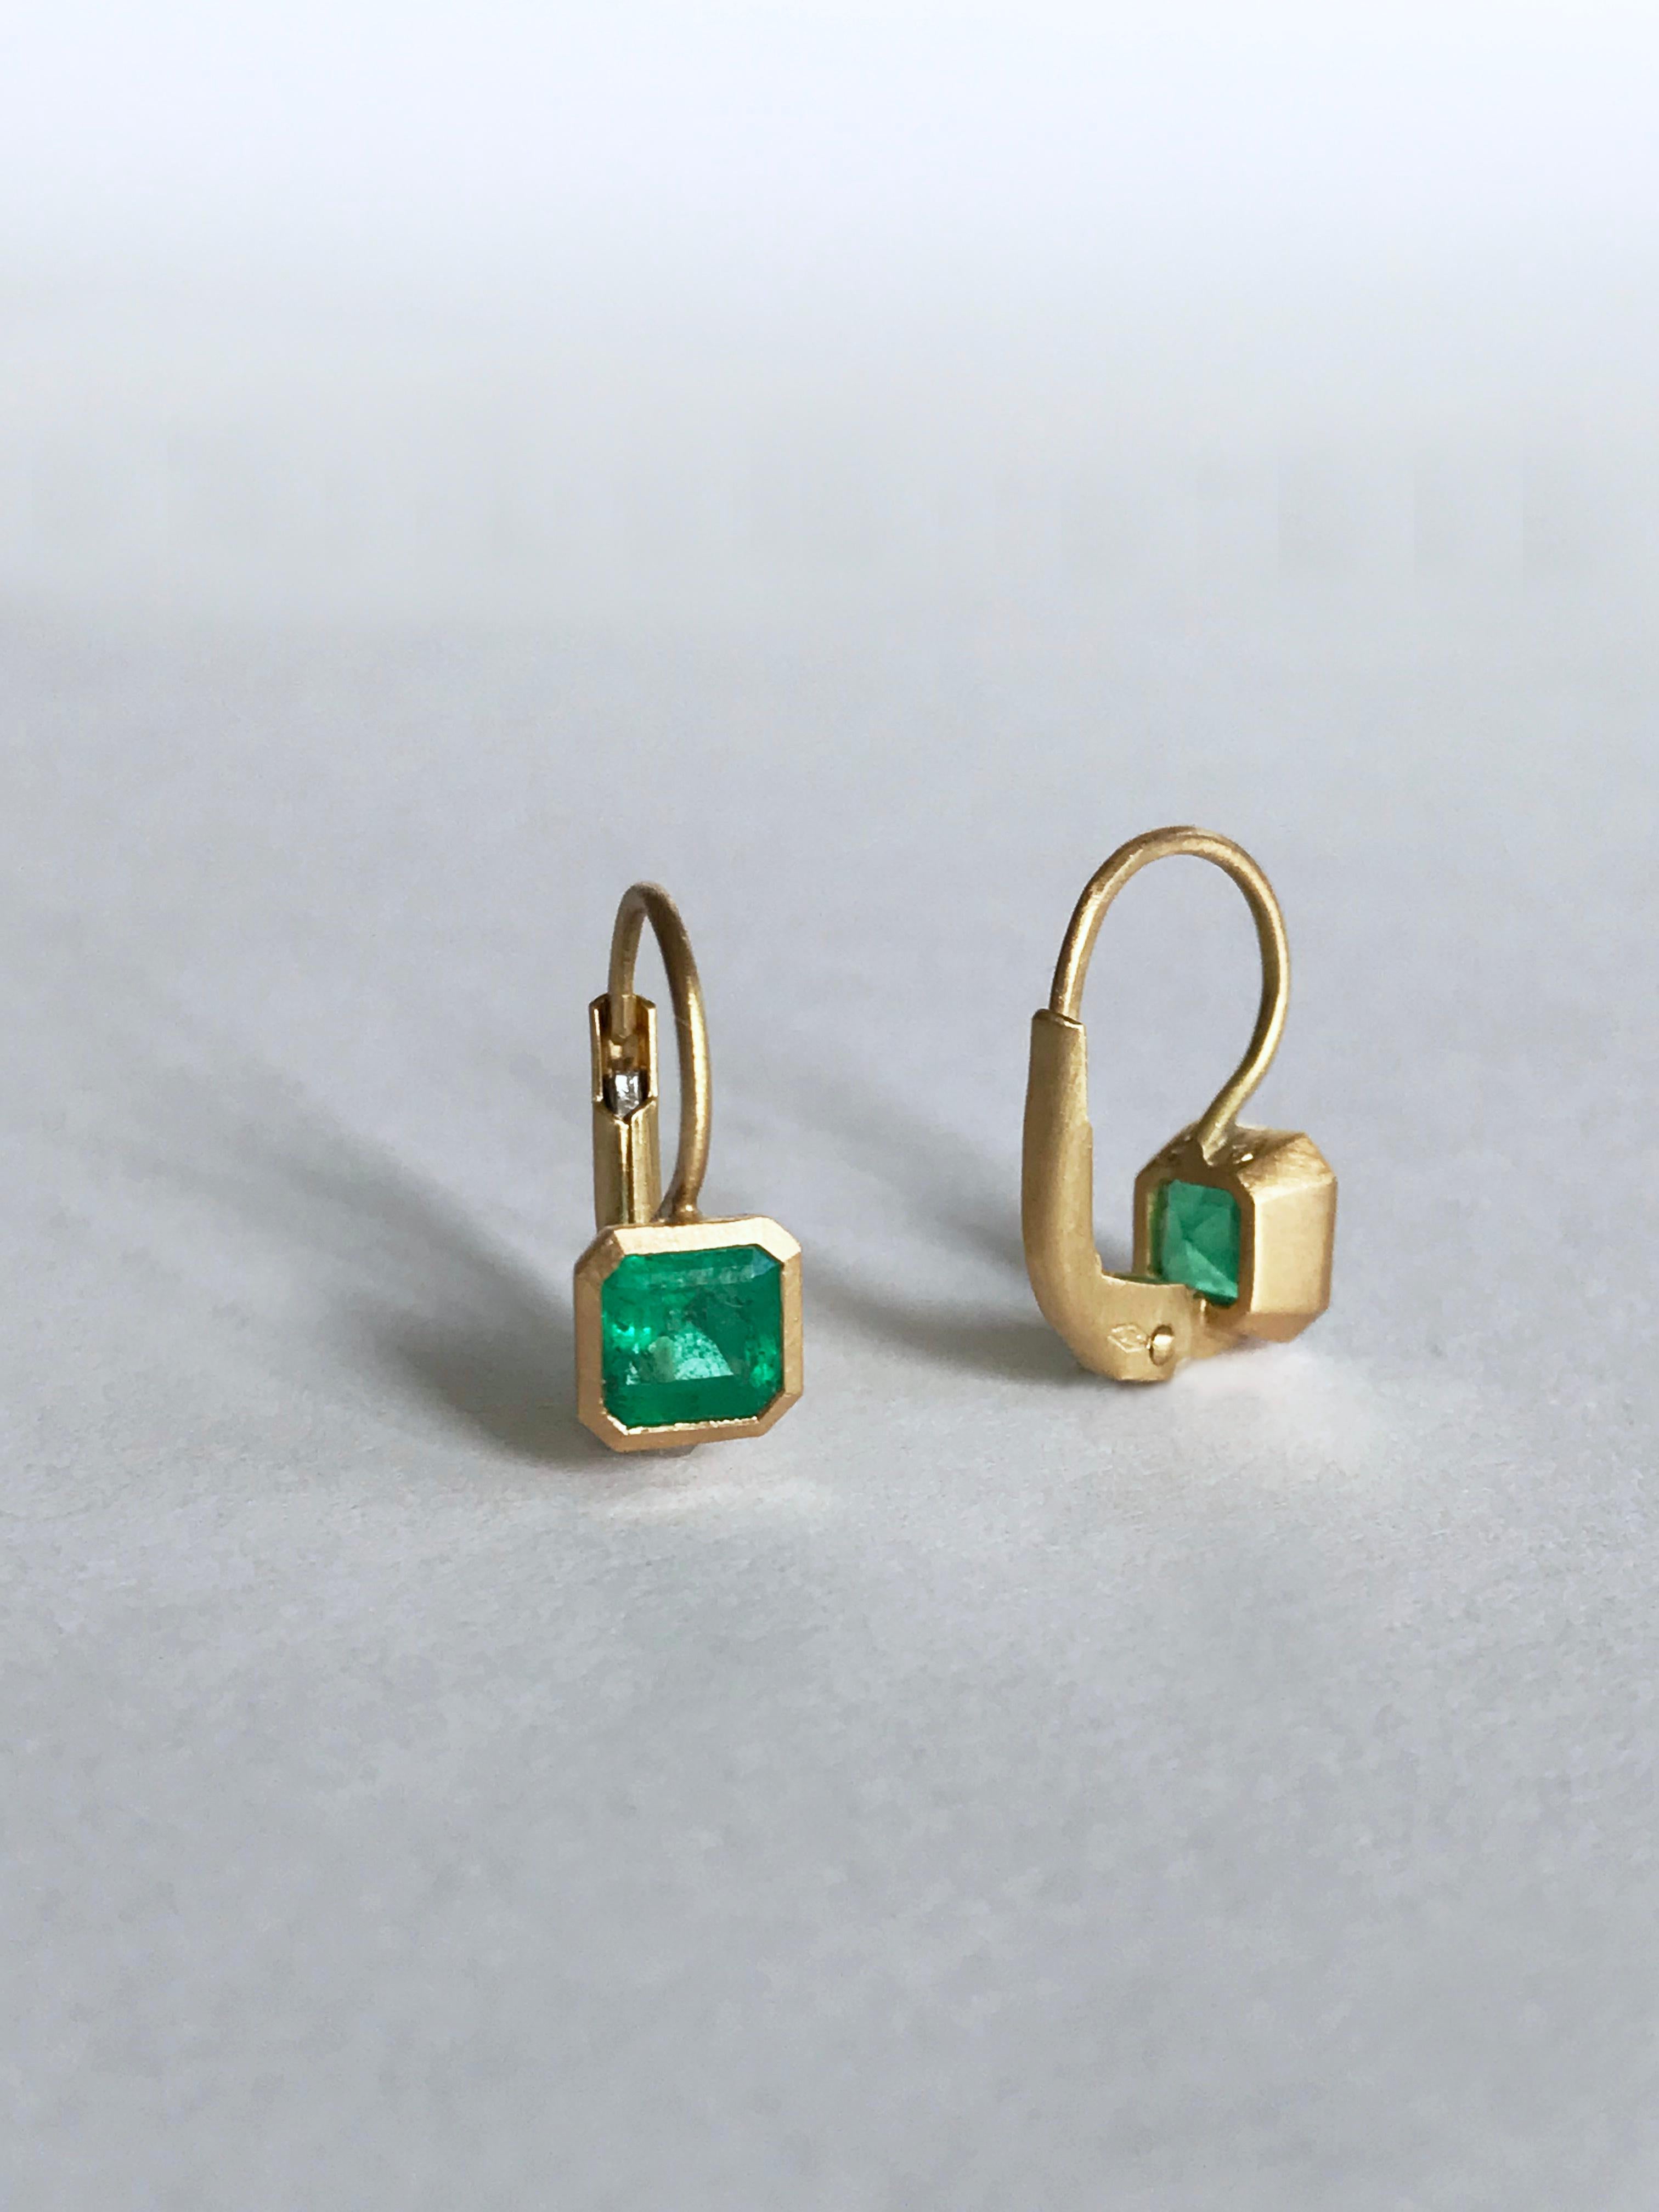 Dalben 0.91 Carat Colombian Emerald Yellow Gold Tiny Earrings For Sale 5